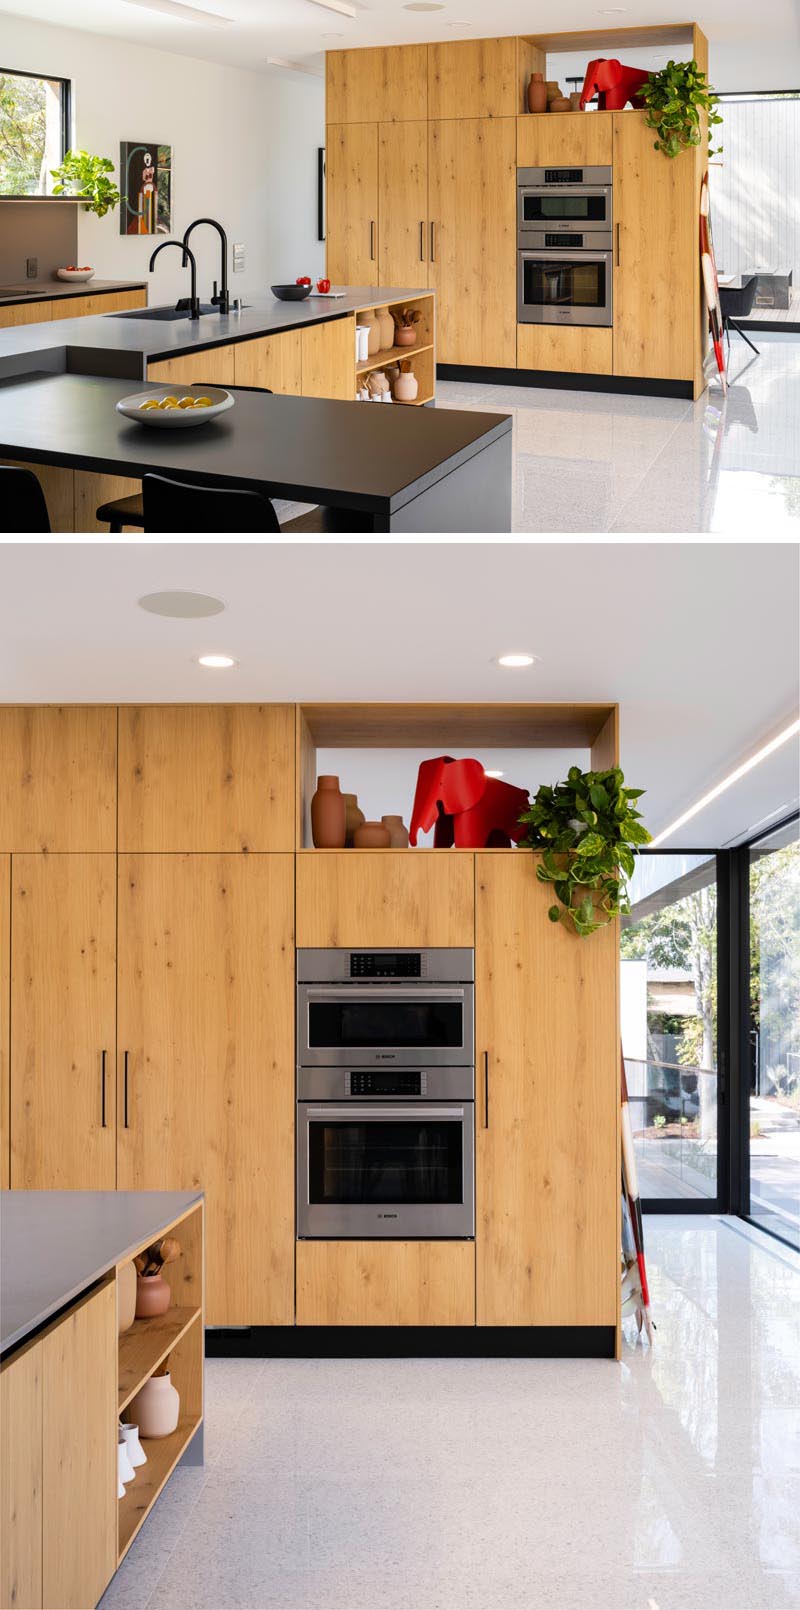 This modern wood kitchen cabinets add a sense of warmth to the home, while darker quartz countertops add a sleek touch to the space. #ModernWoodKitchen #KitchenDesign #WoodKitchen #ModernKitchen